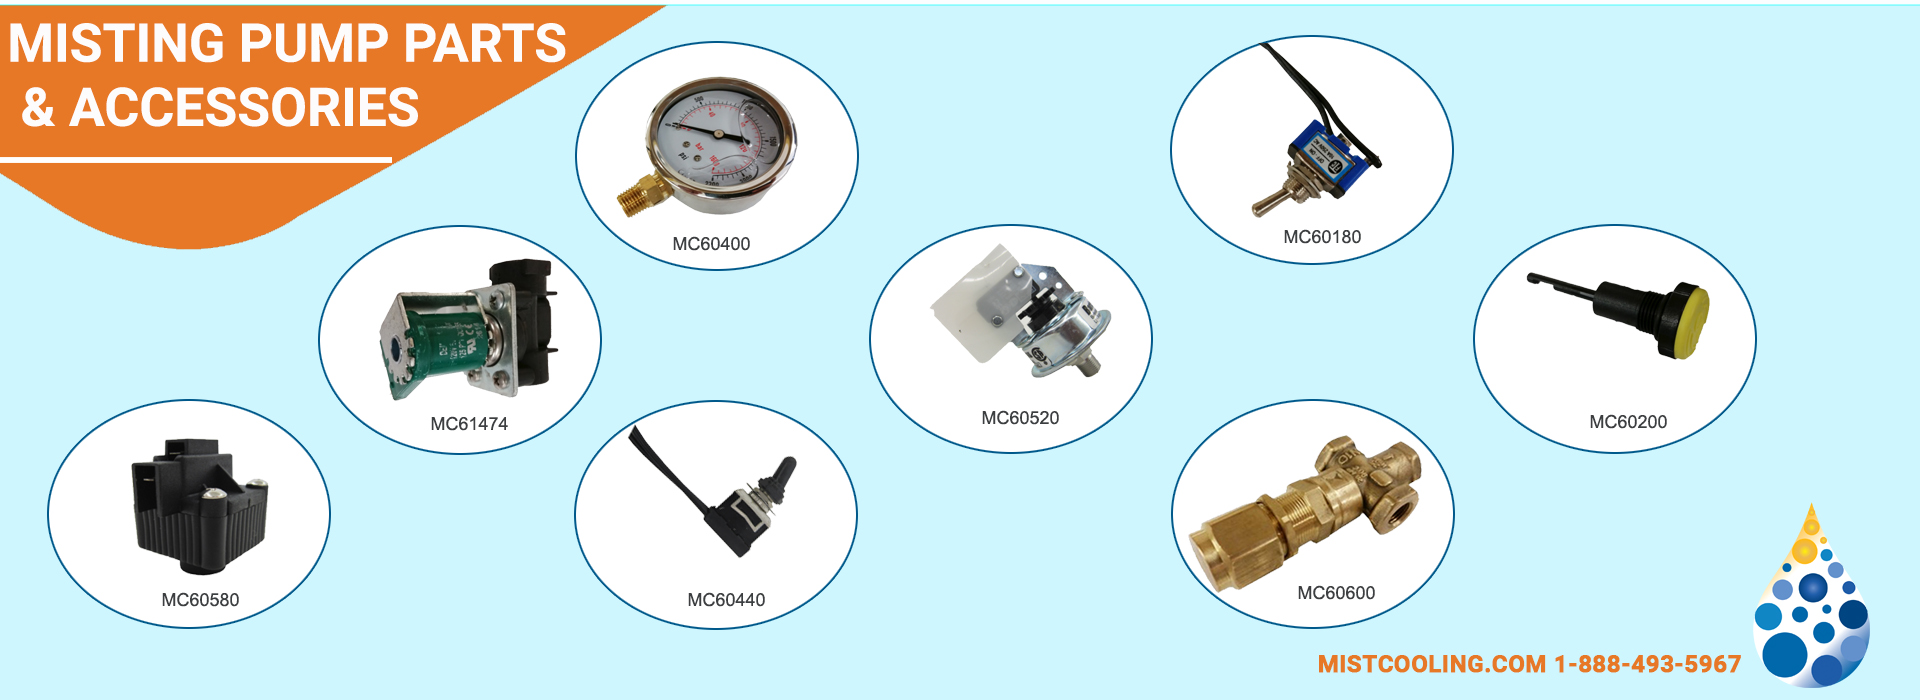 Misting Pump Parts and Accessories